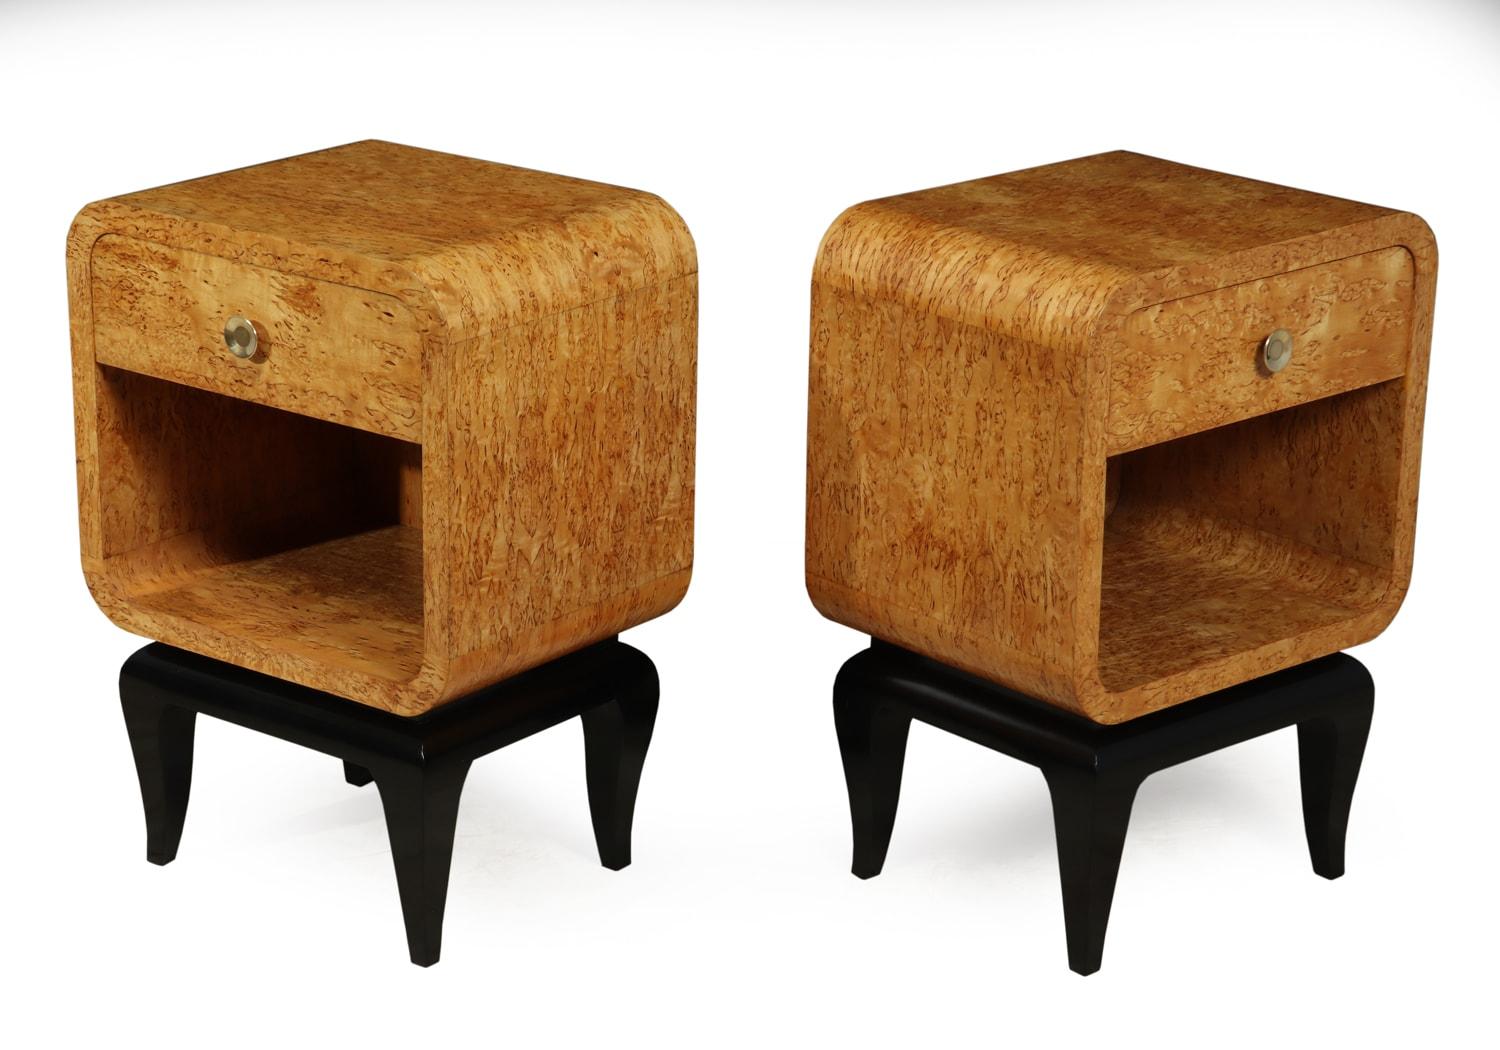 Pair of French Art Deco bedside tables
A pair of Art deco bedsides produced in France in the 1930s from Karelian birch and stand on ebonised legs, with a single drawer and brass handles the bedside tables have been fully polished and are in